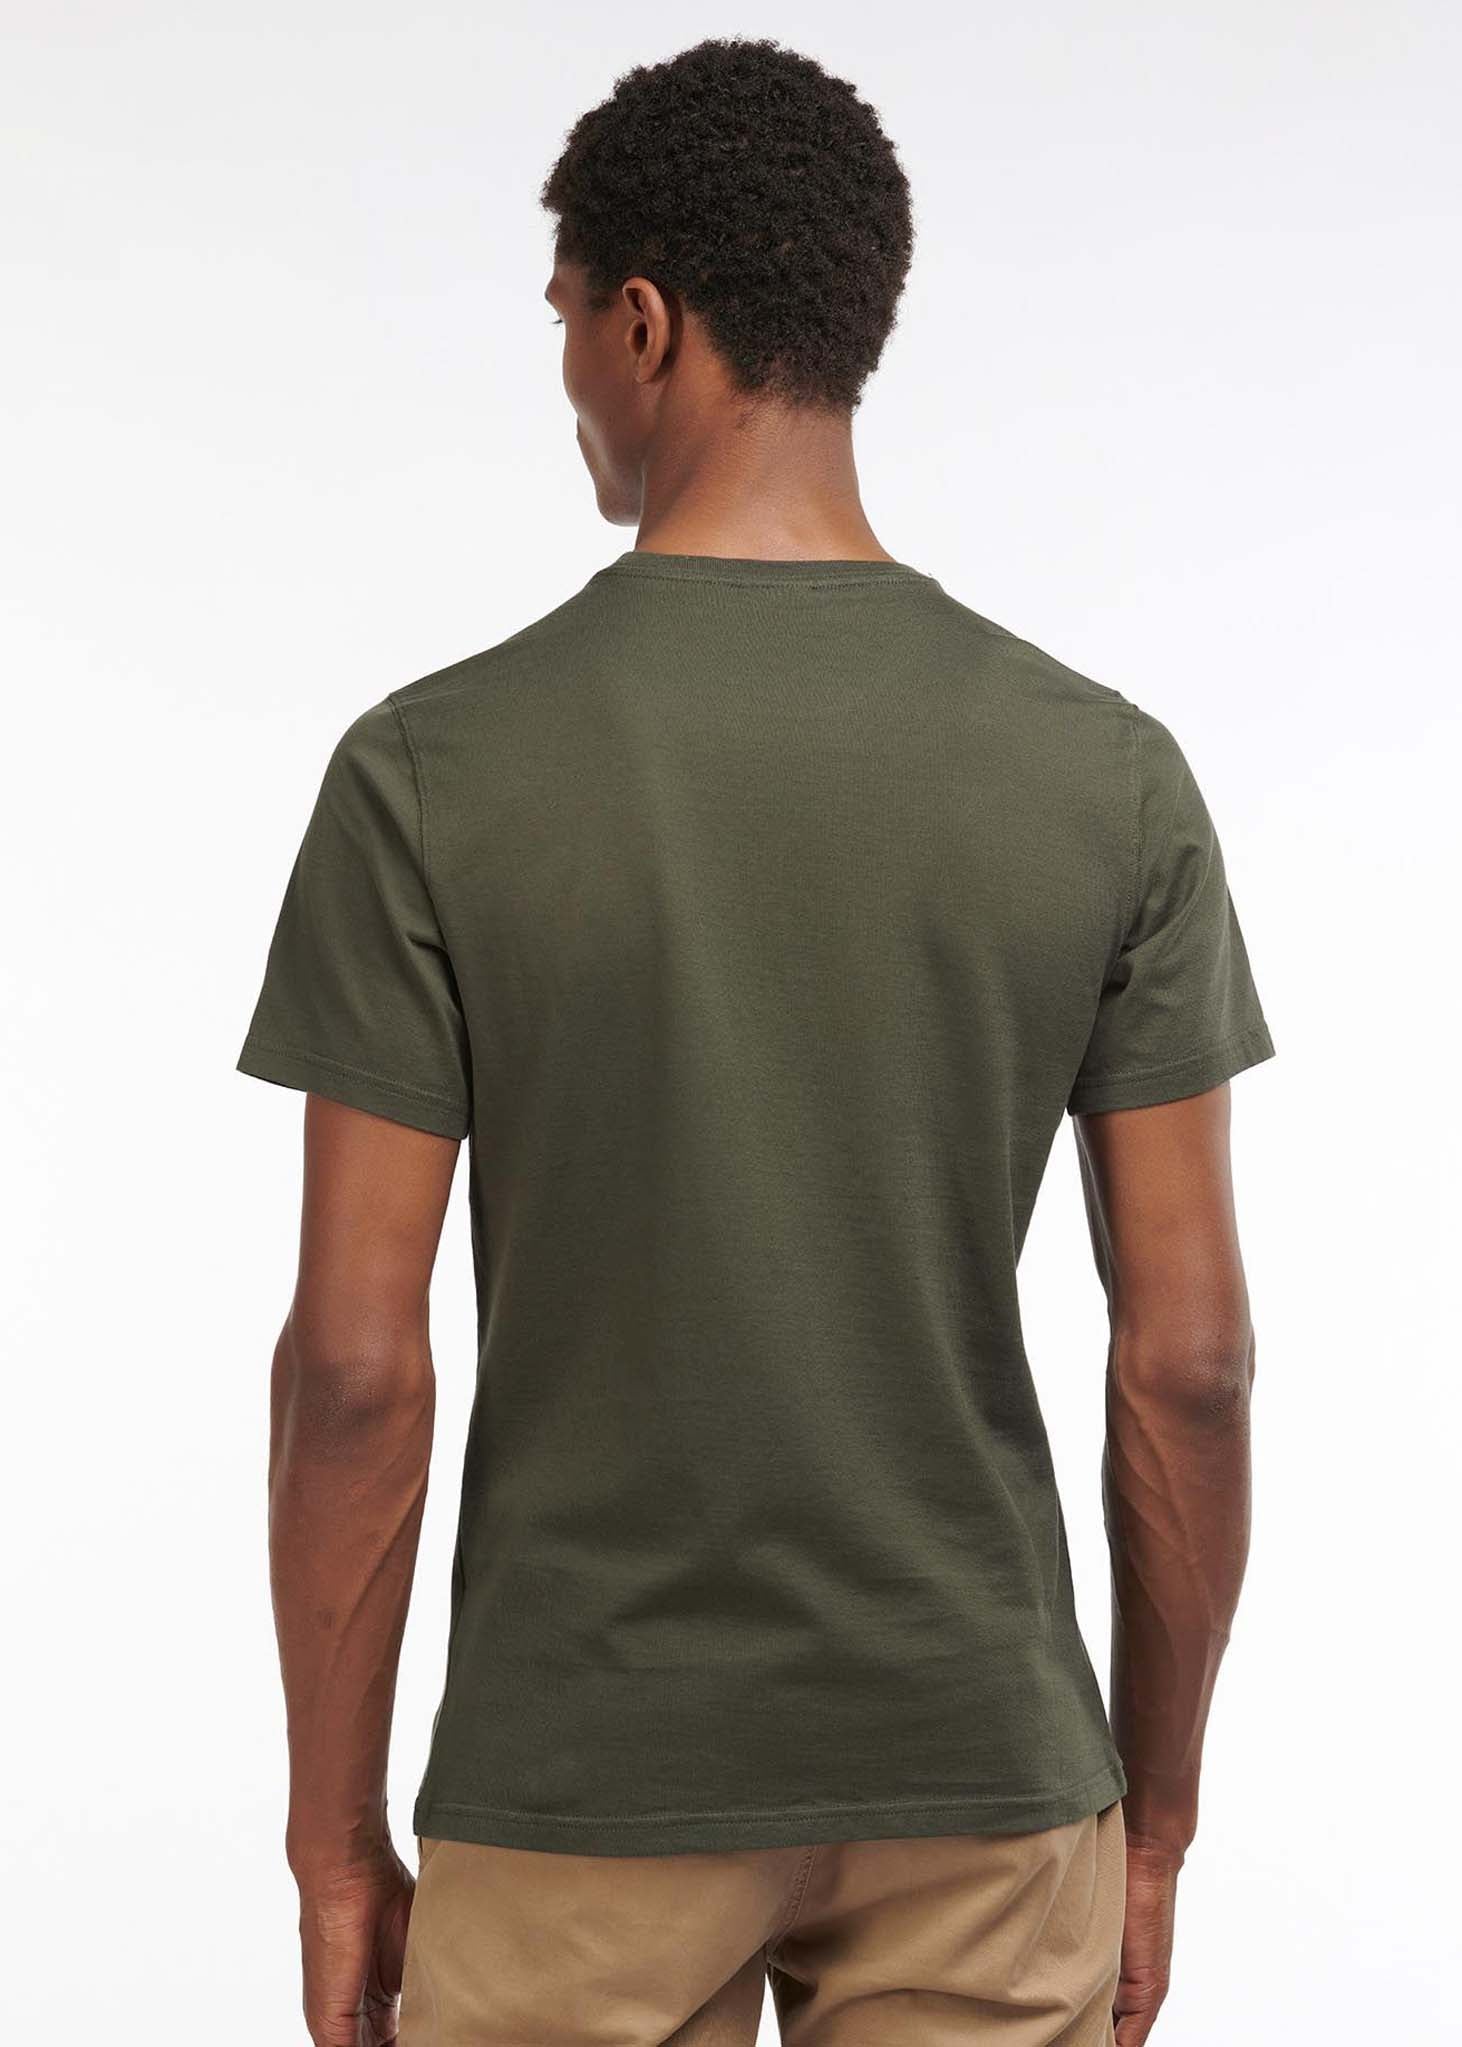 Barbour T-shirts  Wallace tee - forest 